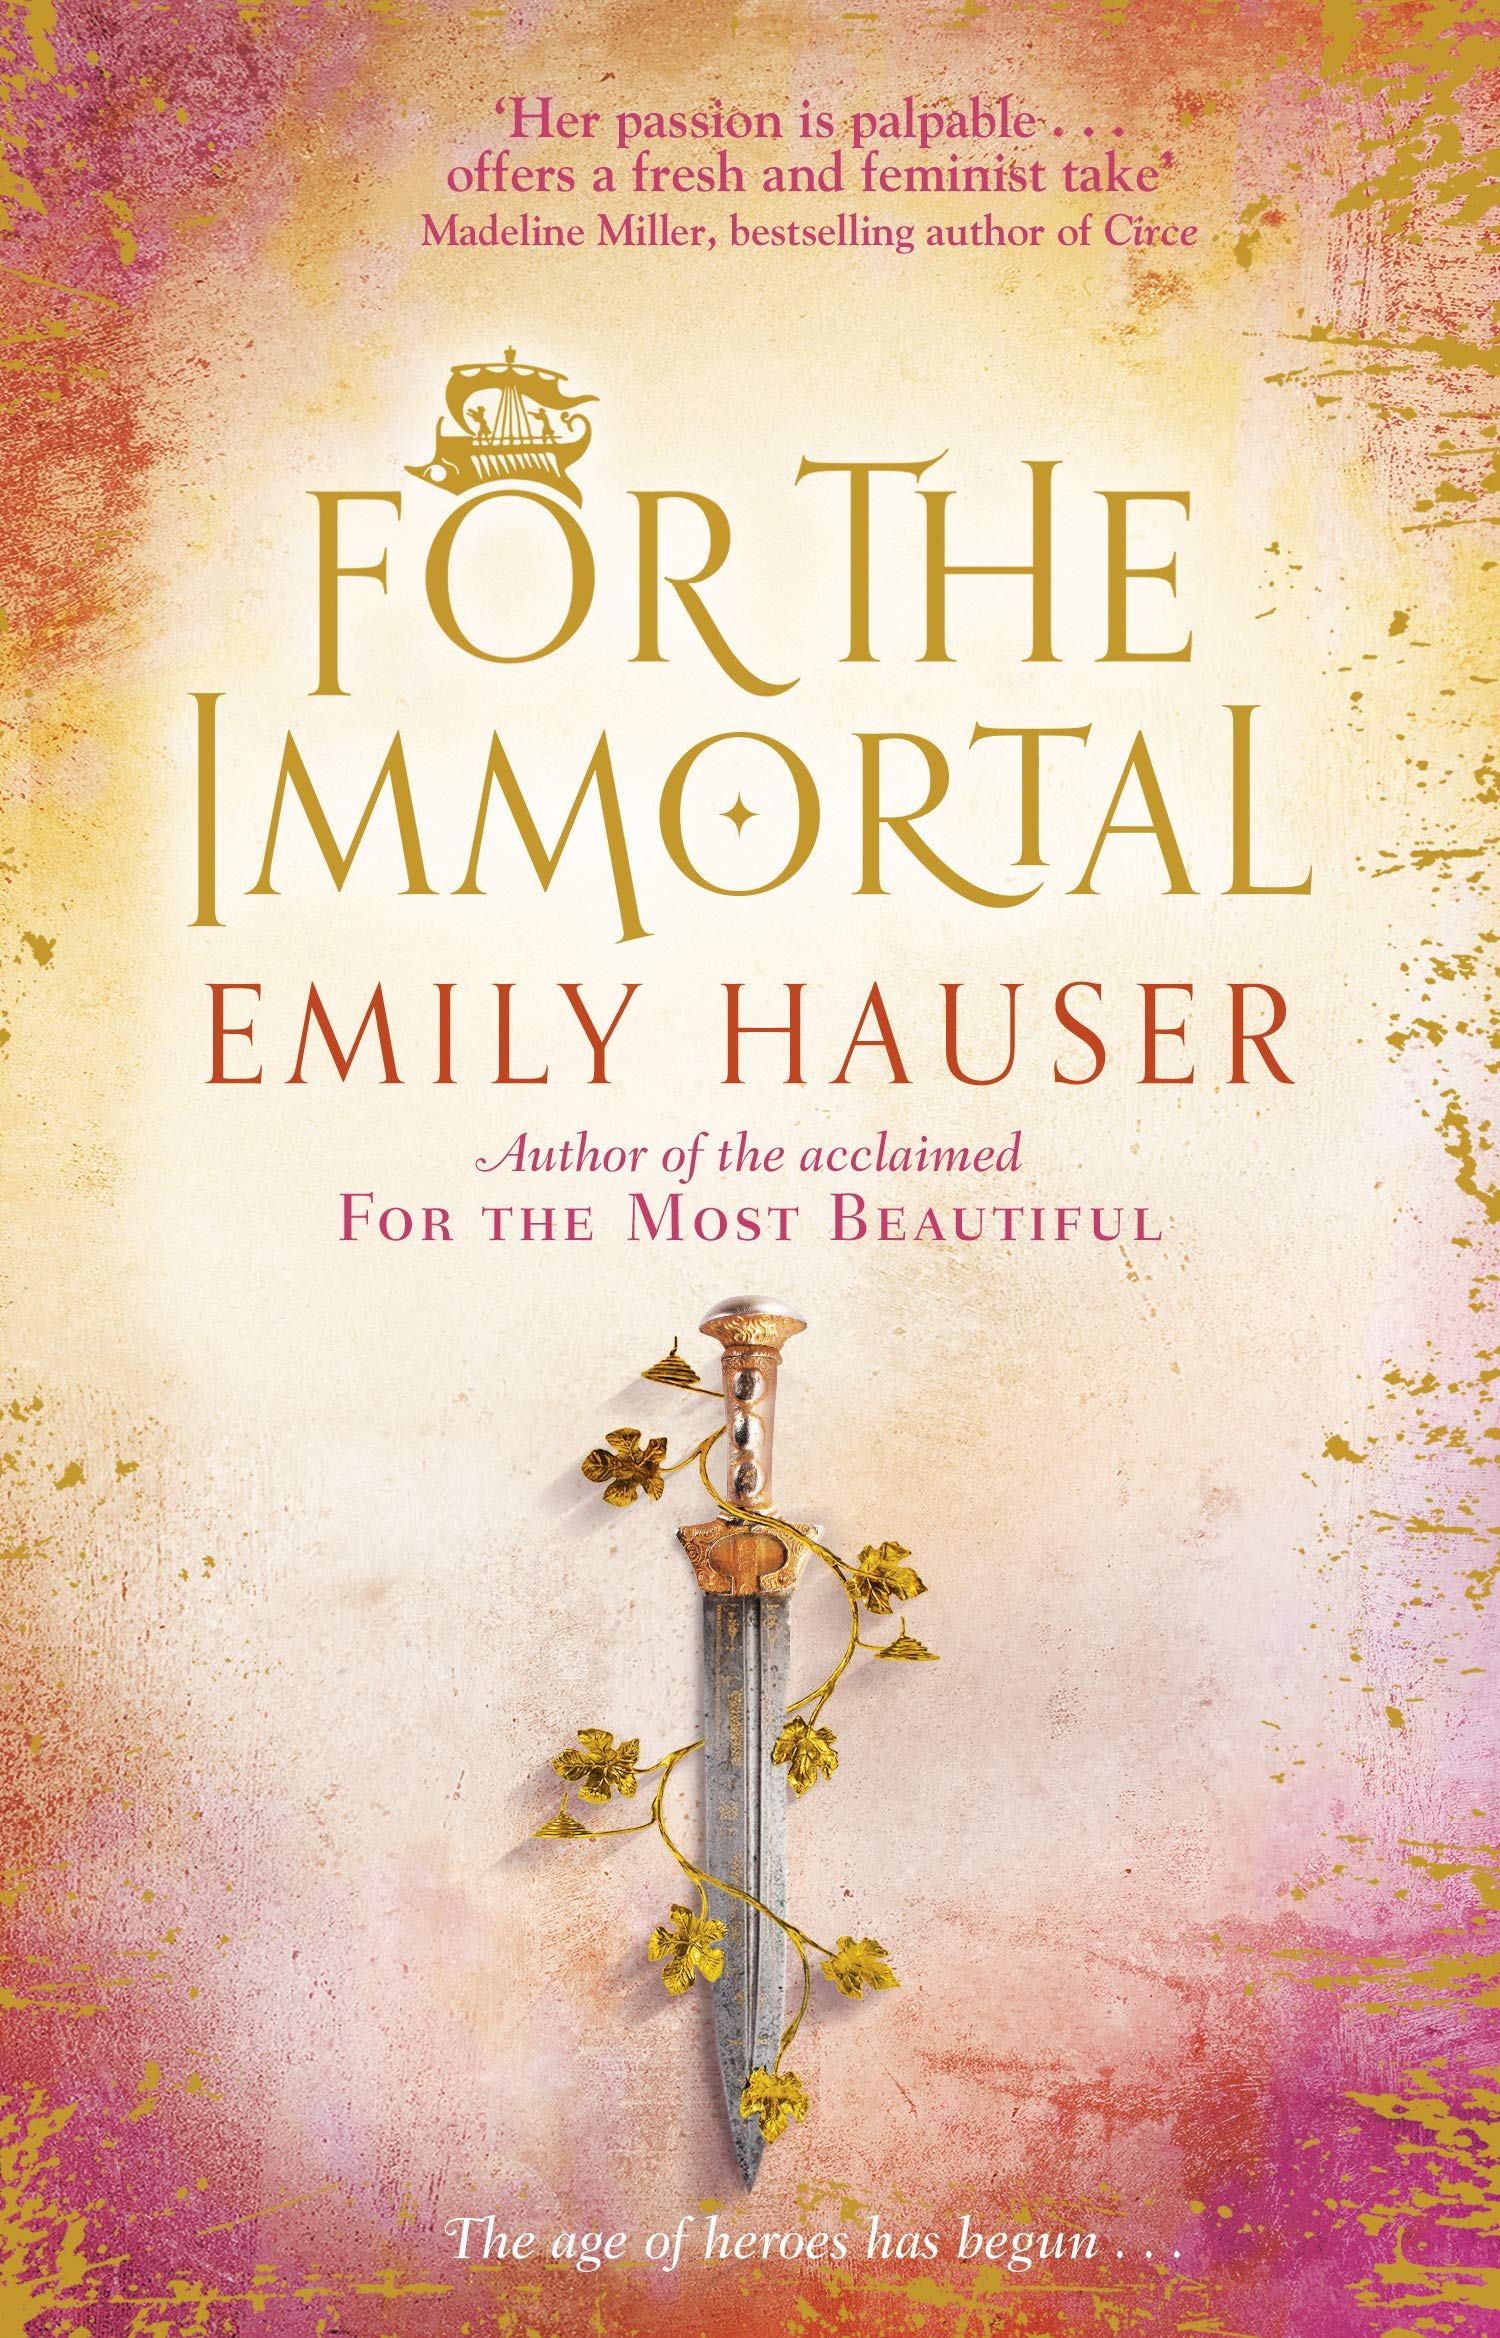 For The Immortal | Emily Hauser